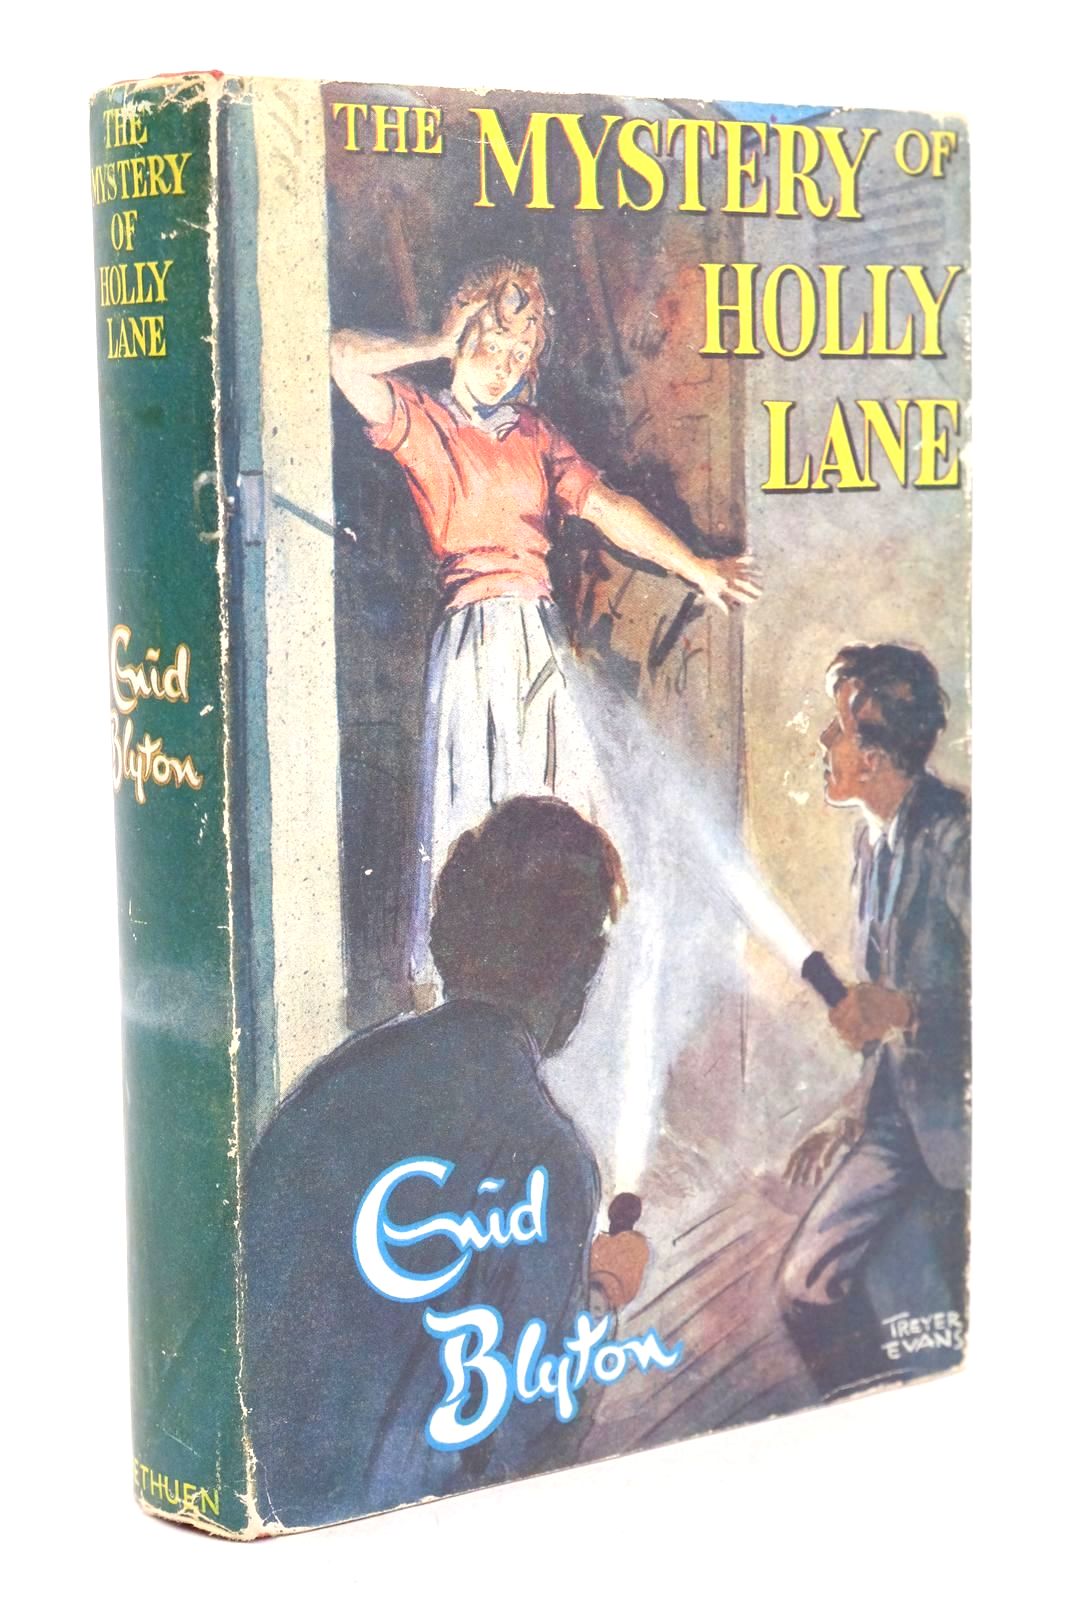 Photo of THE MYSTERY OF HOLLY LANE written by Blyton, Enid illustrated by Evans, Treyer published by Methuen &amp; Co. Ltd. (STOCK CODE: 1326911)  for sale by Stella & Rose's Books